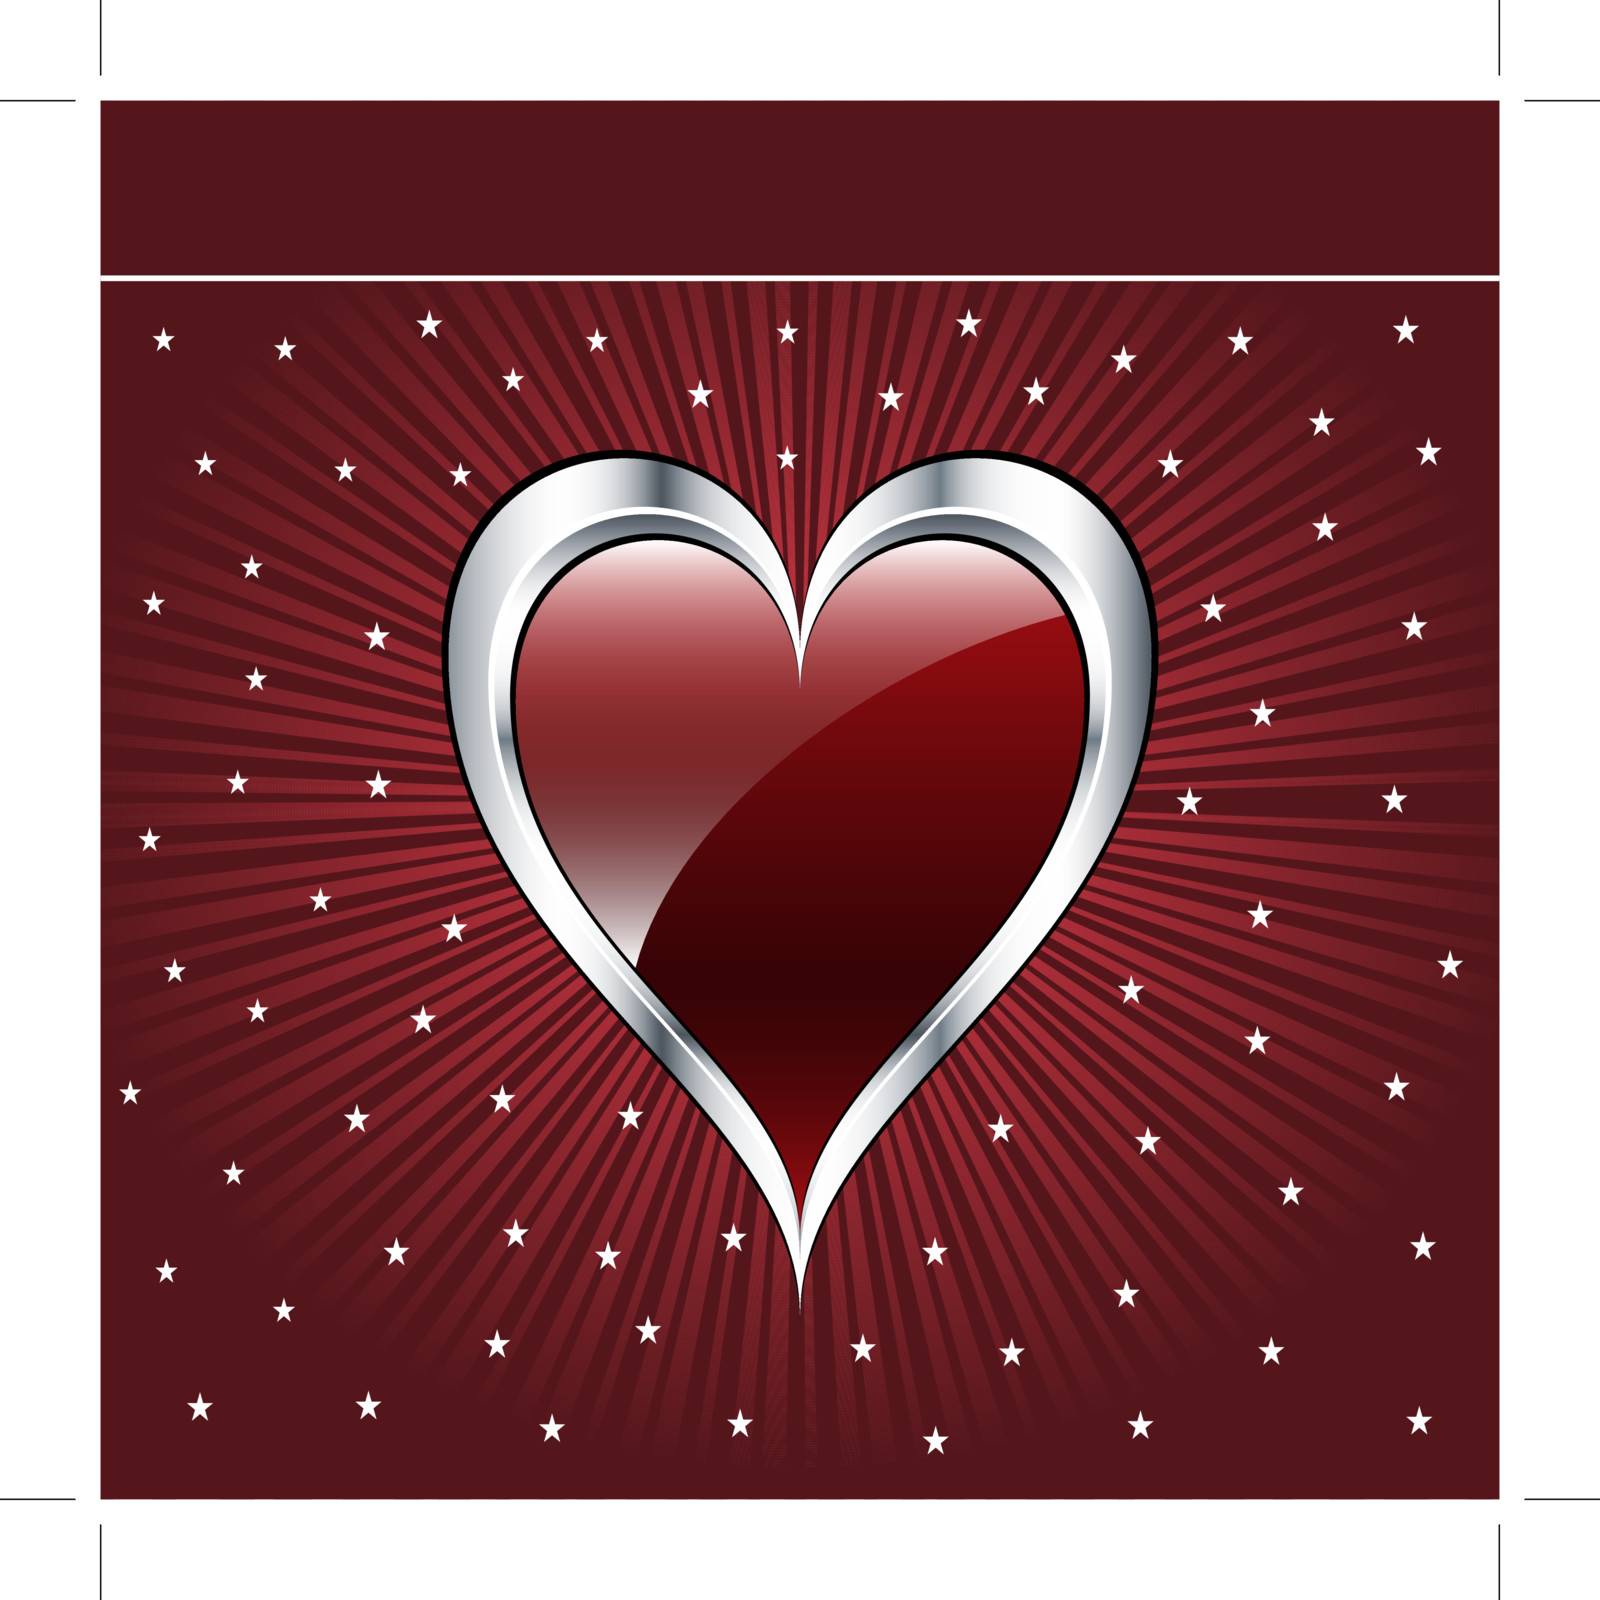 Valentine love heart in a dark red and silver on sunburst background with stars. Copyspace for text.